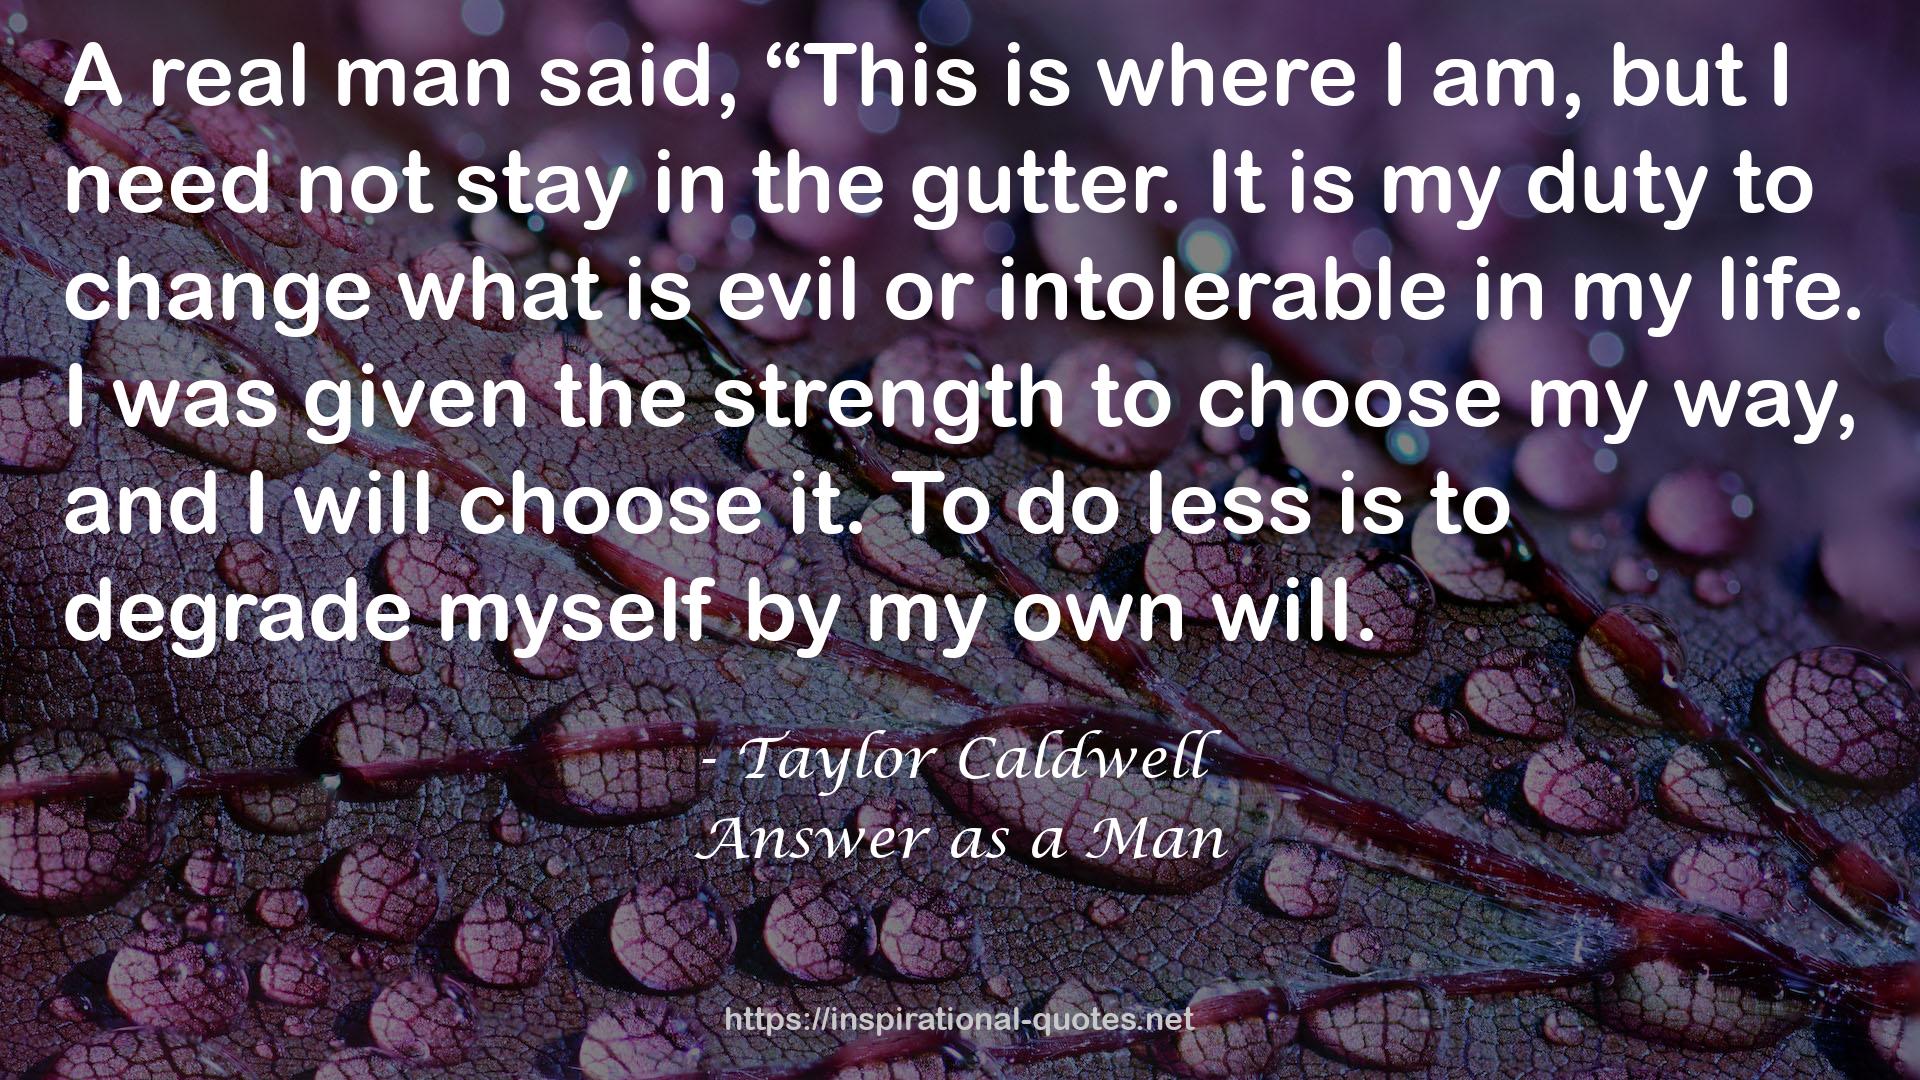 Answer as a Man QUOTES